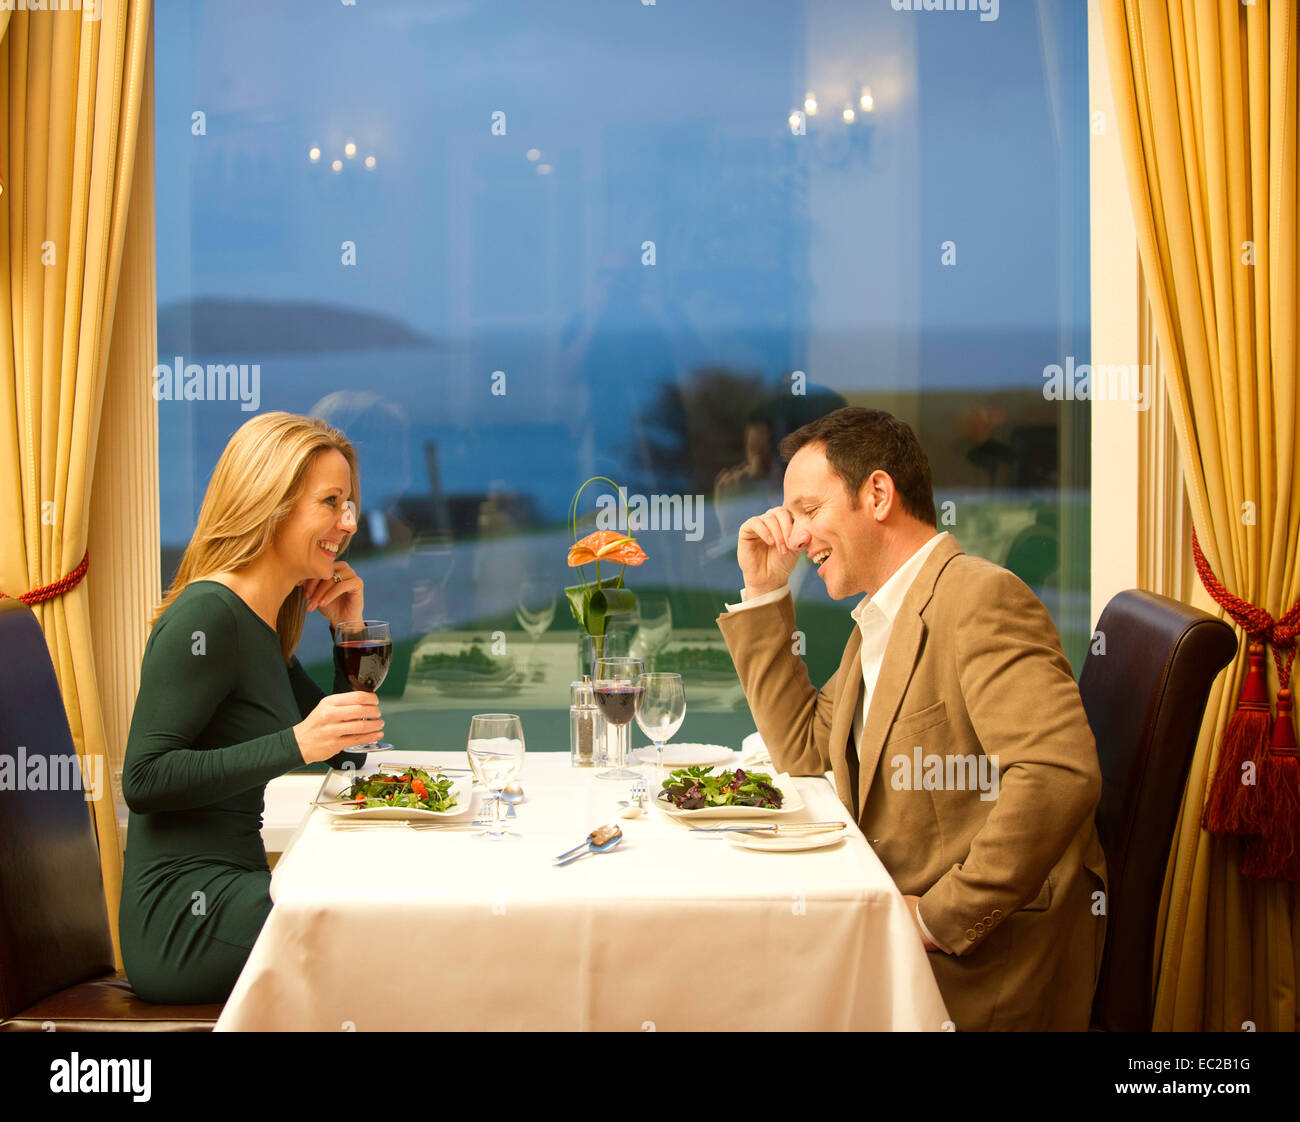 A couple having a romantic evening meal Stock Photo